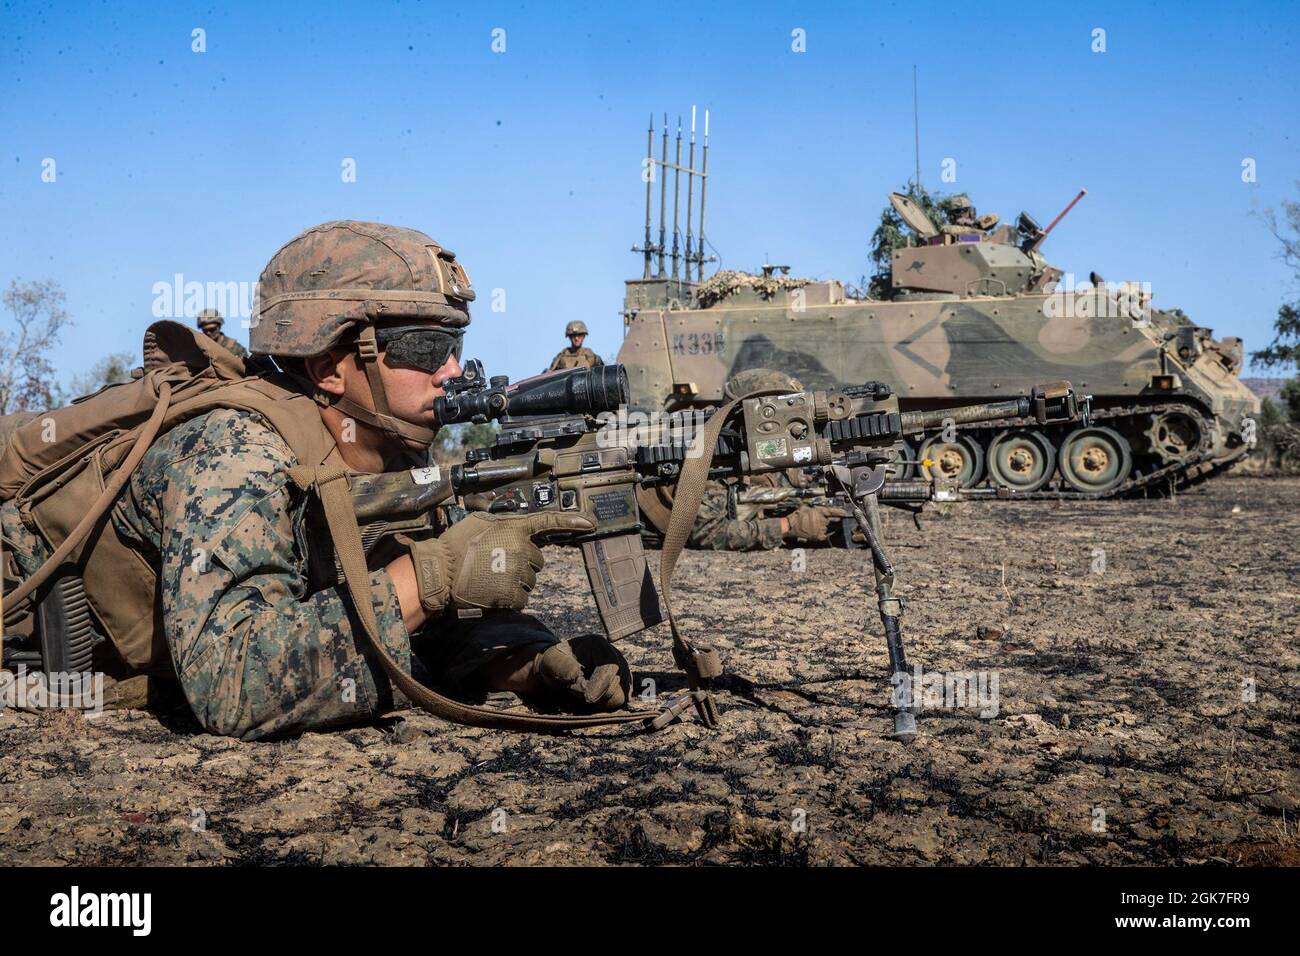 U.S. Marine Corps Lance Cpl. Yorvi Colladopichardo, a rifleman with Company B., 1st Battalion, 7th Marine Regiment (Reinforced), Marine Rotational Force – Darwin, lies in a prone position next to an Australian M113 AS4 Armored Personnel Carrier during a dry-run rehearsal at Bradshaw Field Training Area, NT, Australia, Aug. 25, 2021. The dry-run rehearsals were in preparation for a live-fire event between Marines and the Australian Army for Exercise Koolendong. Exercise Koolendong validates MRF-D’s and the Australian Defence Force’s ability to conduct expeditionary command and control operation Stock Photo